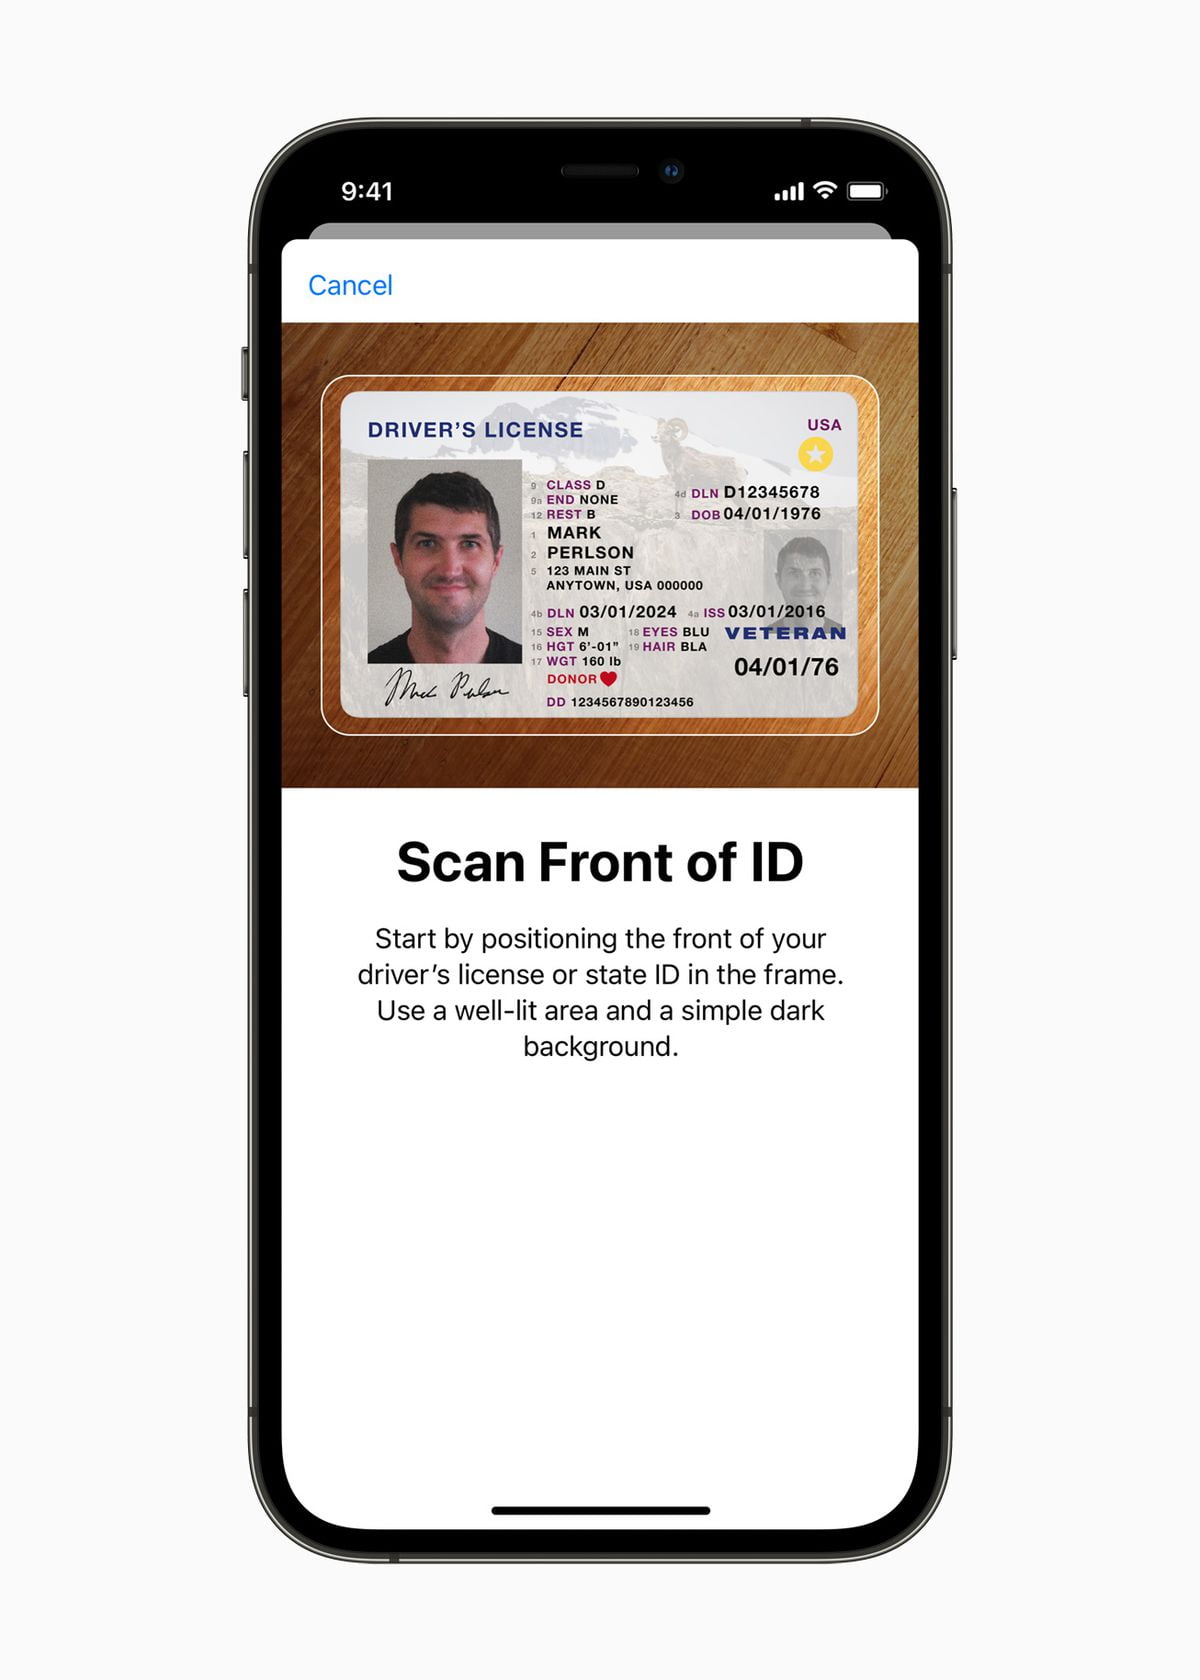 the-new-digital-drivers-licenses-from-apple-sound-slightly-creepy